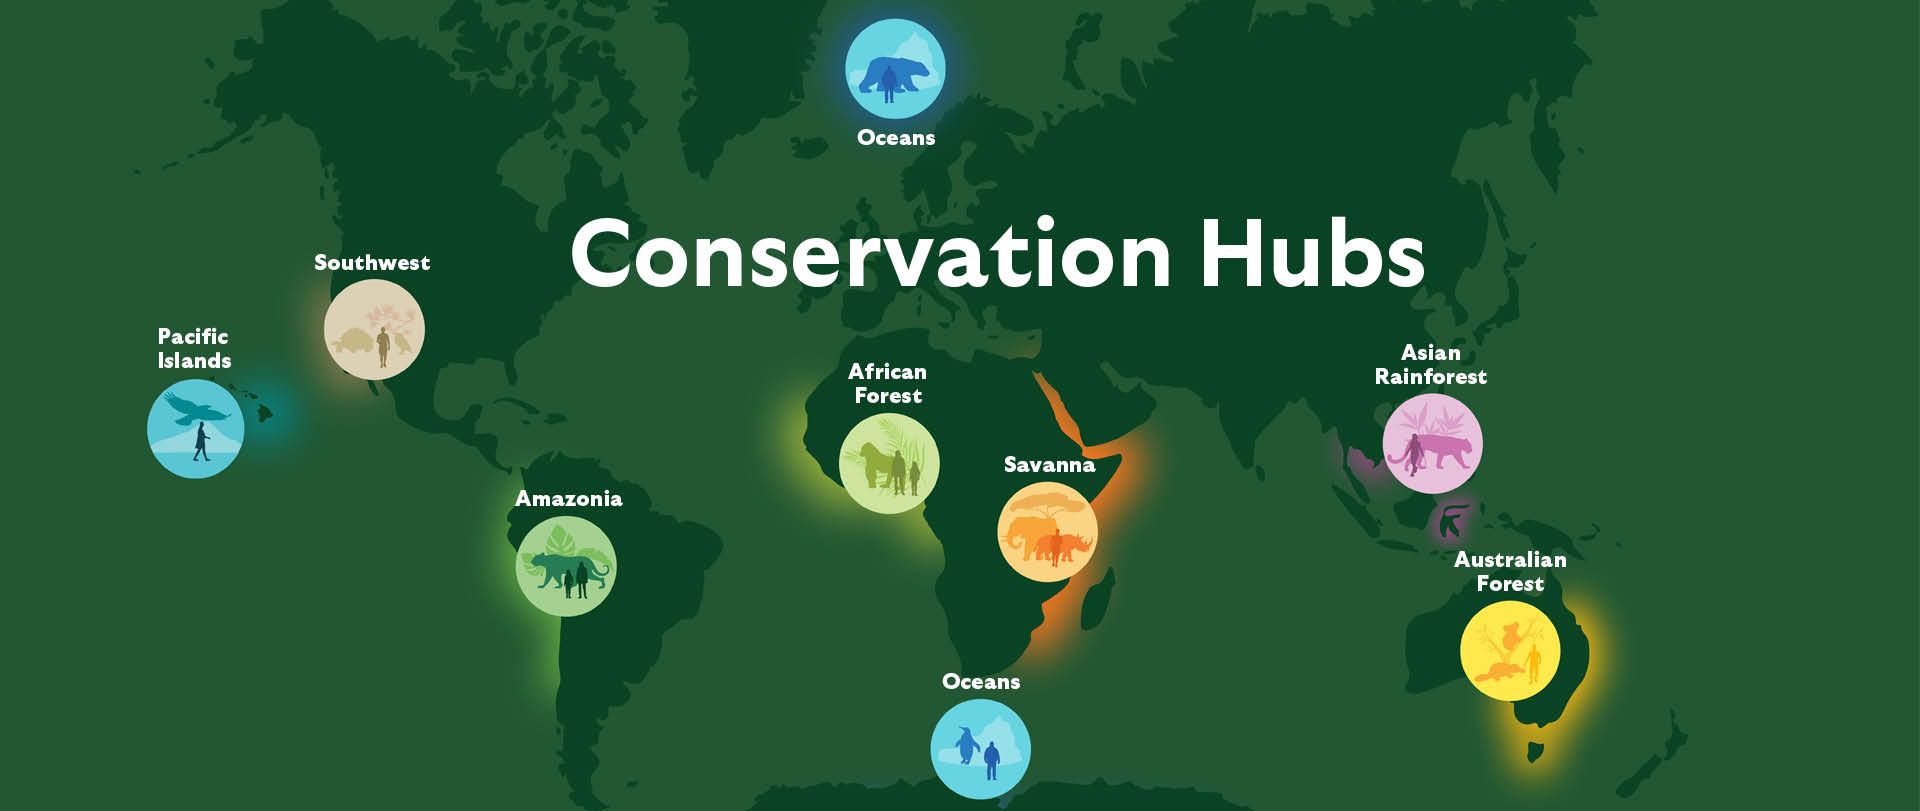 world map showing conservation hub locations